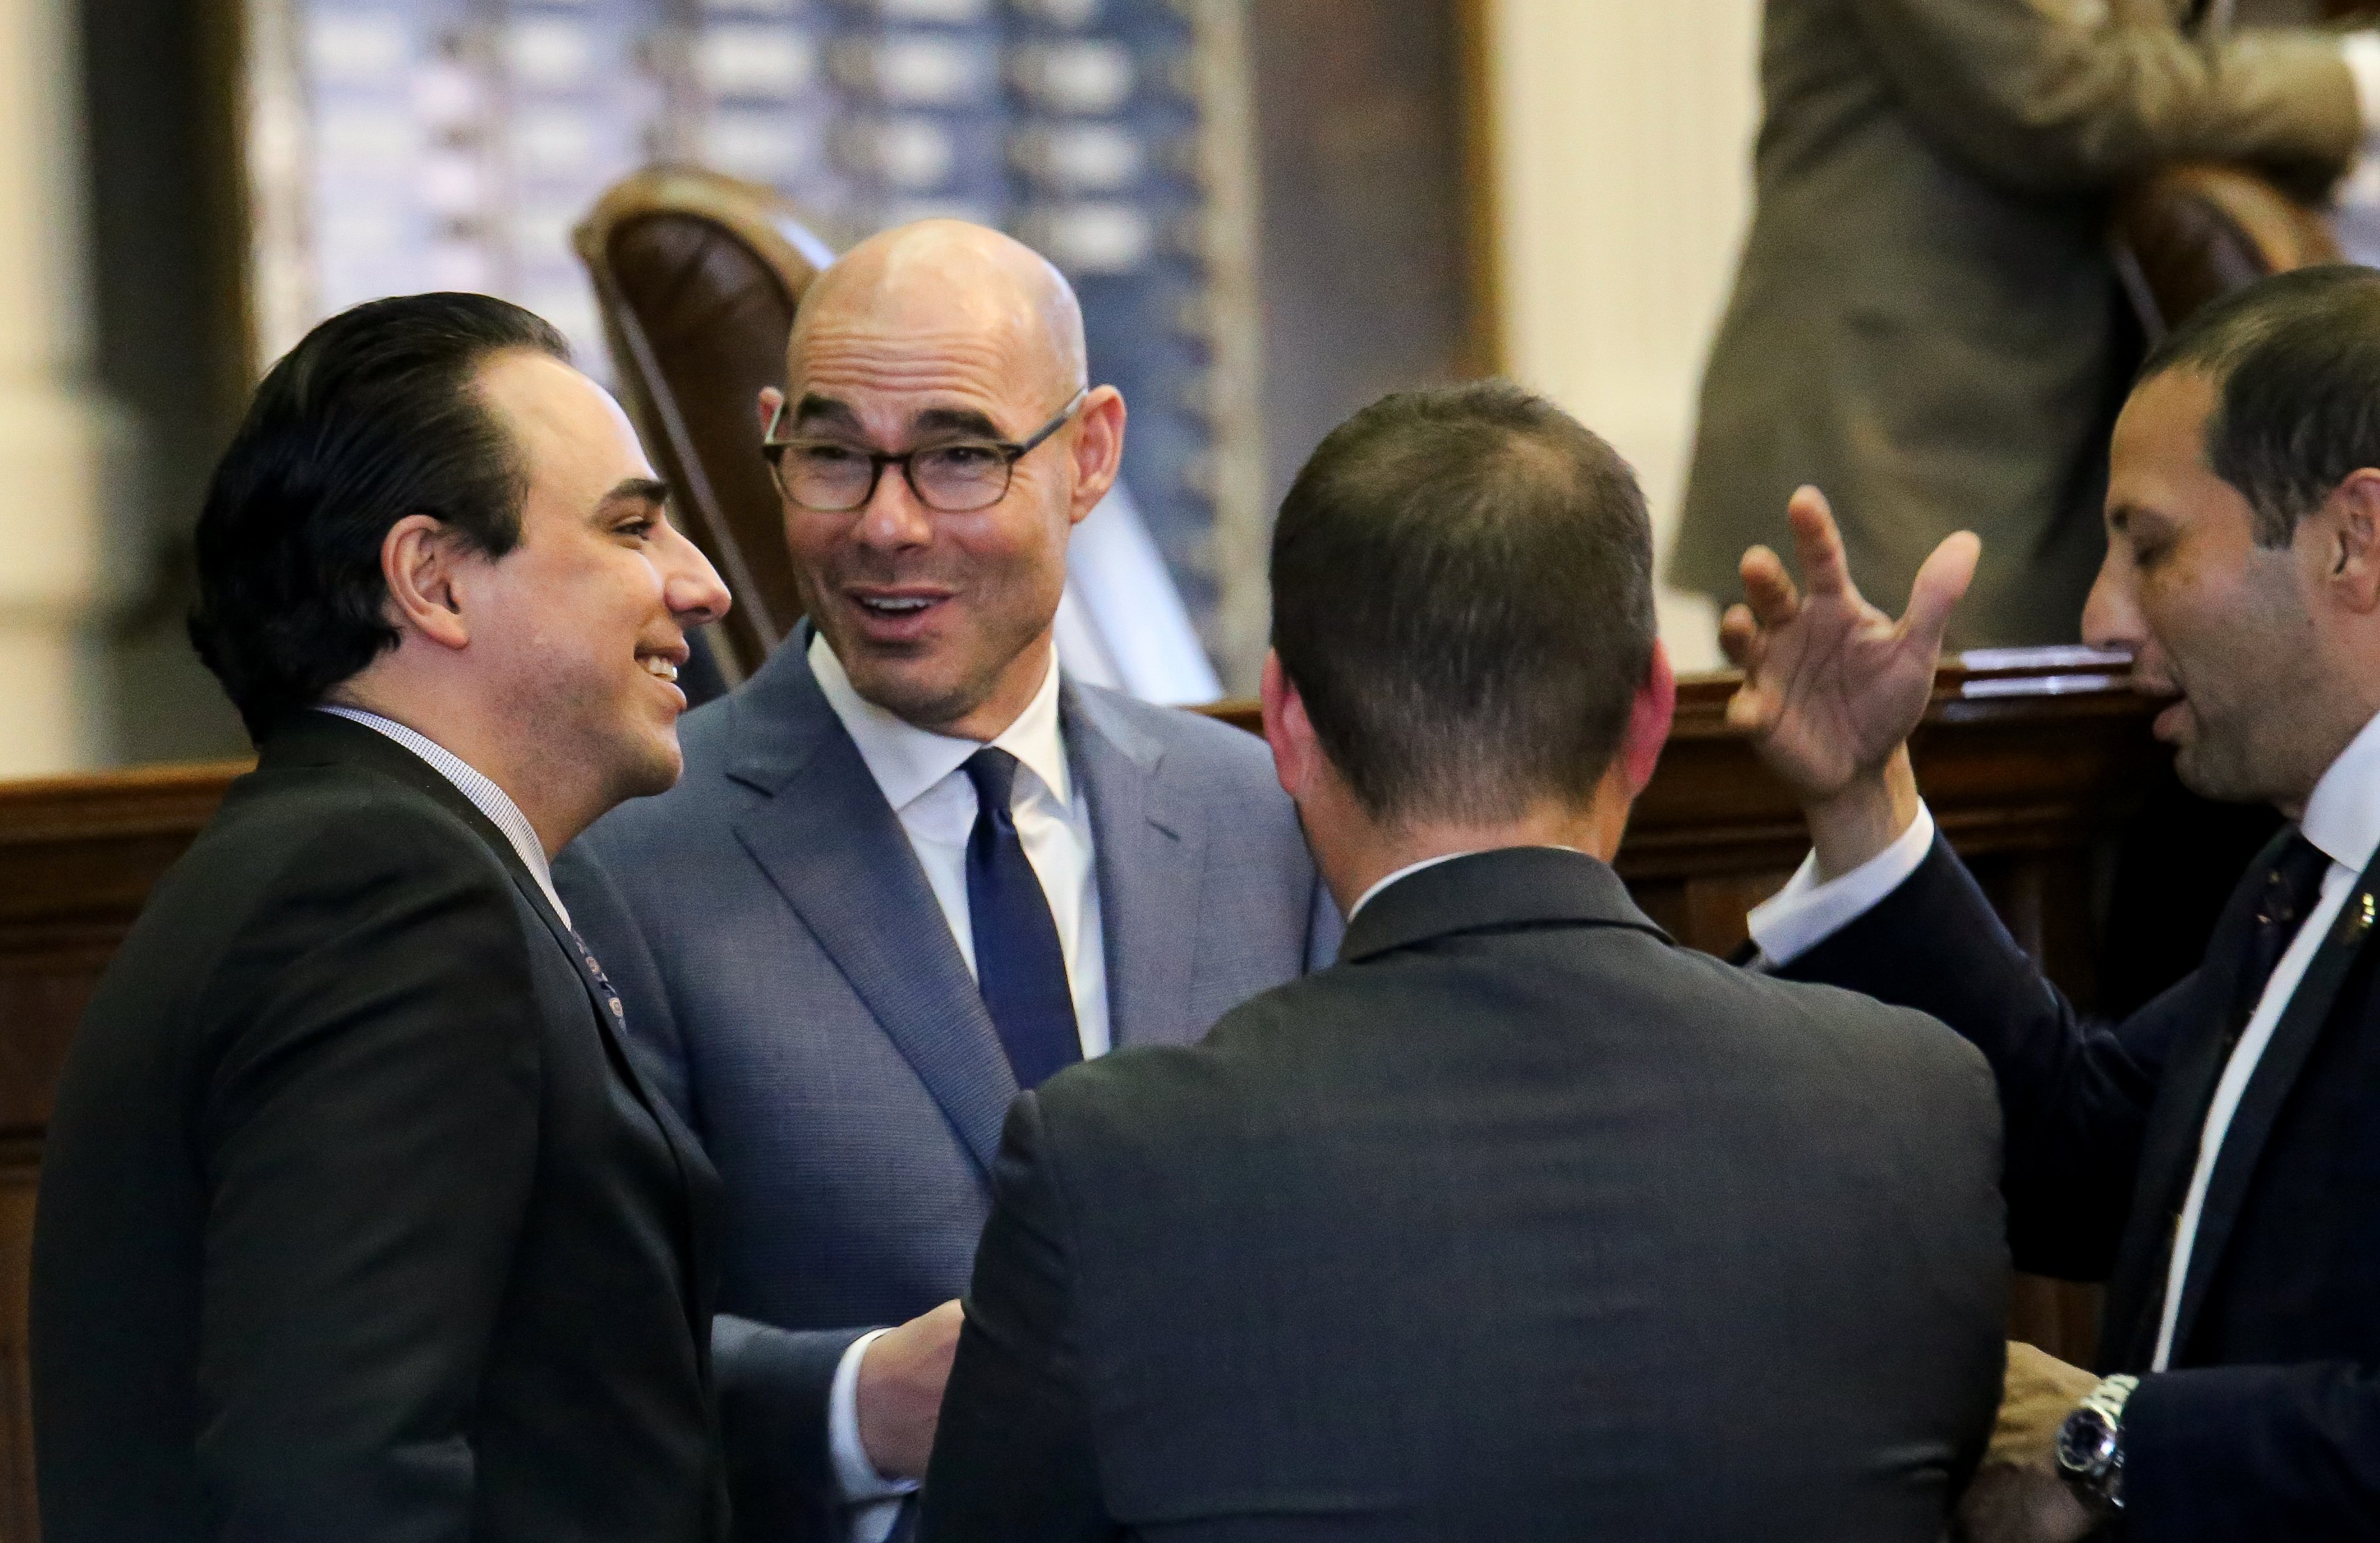 Texas House Speaker Dennis Bonnen (center) speaks with state Representatives Terry Canales (left) and Poncho Nevárez (right).